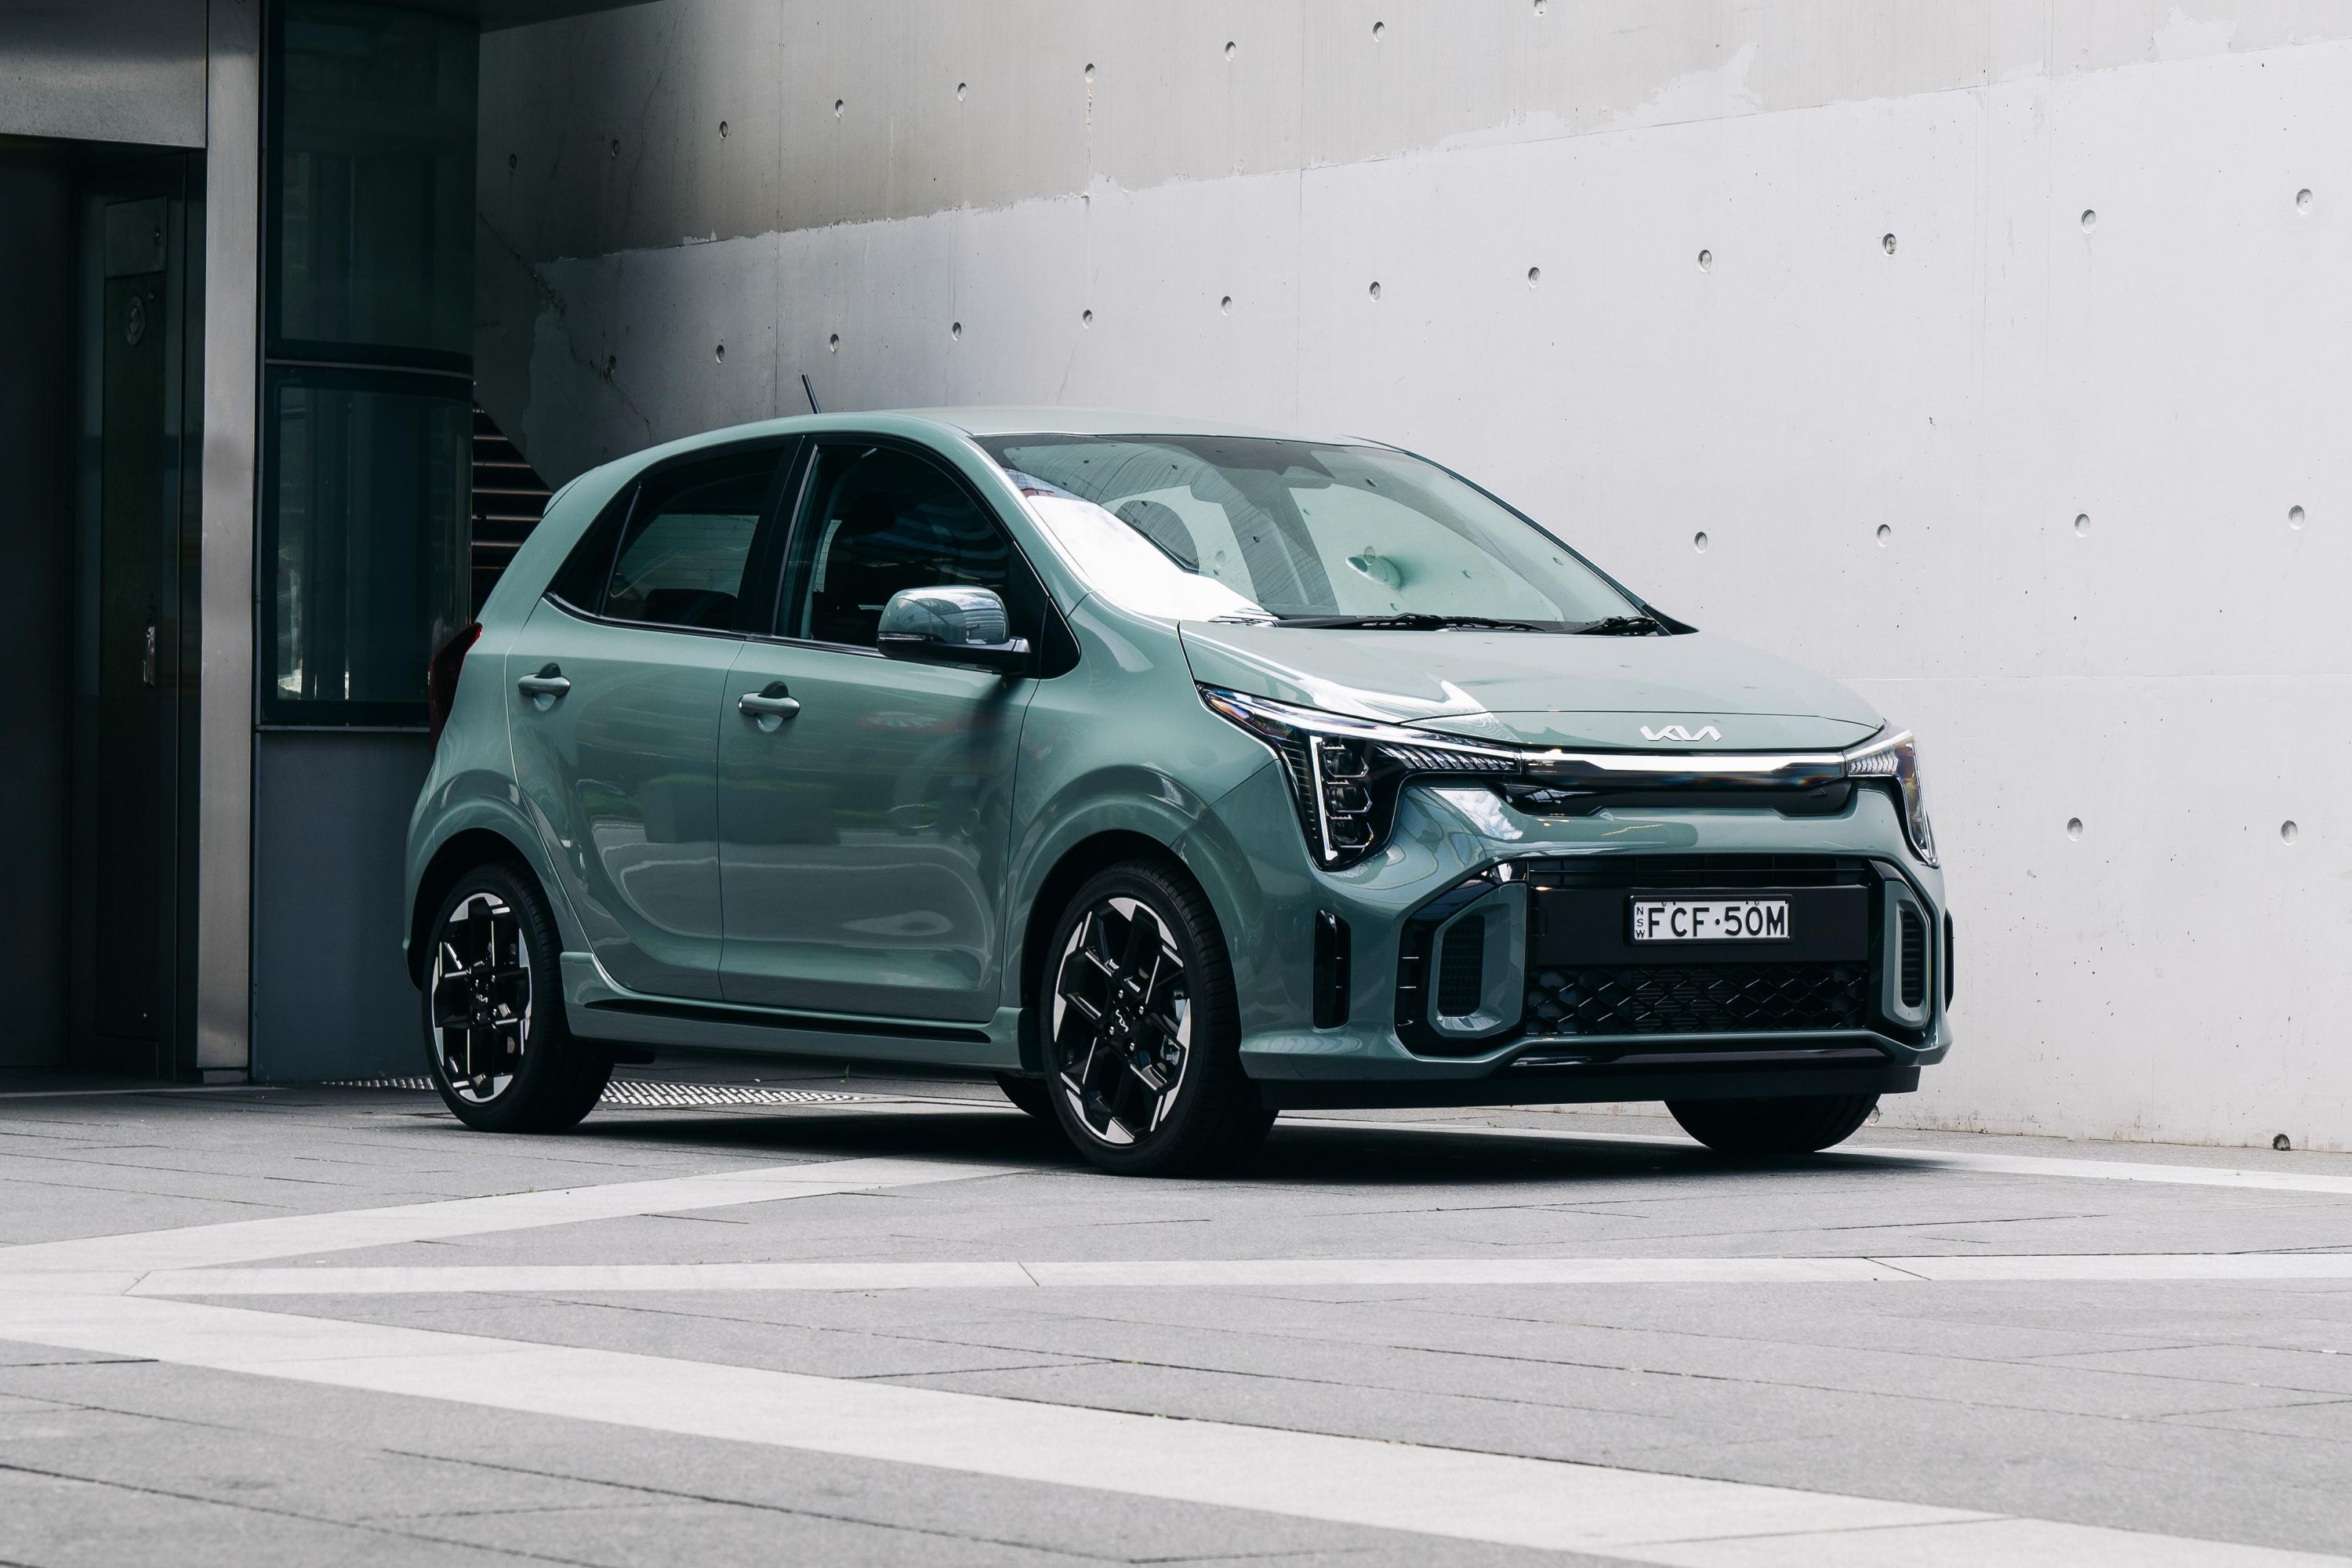 New Kia Picanto revealed: price, specs and release date